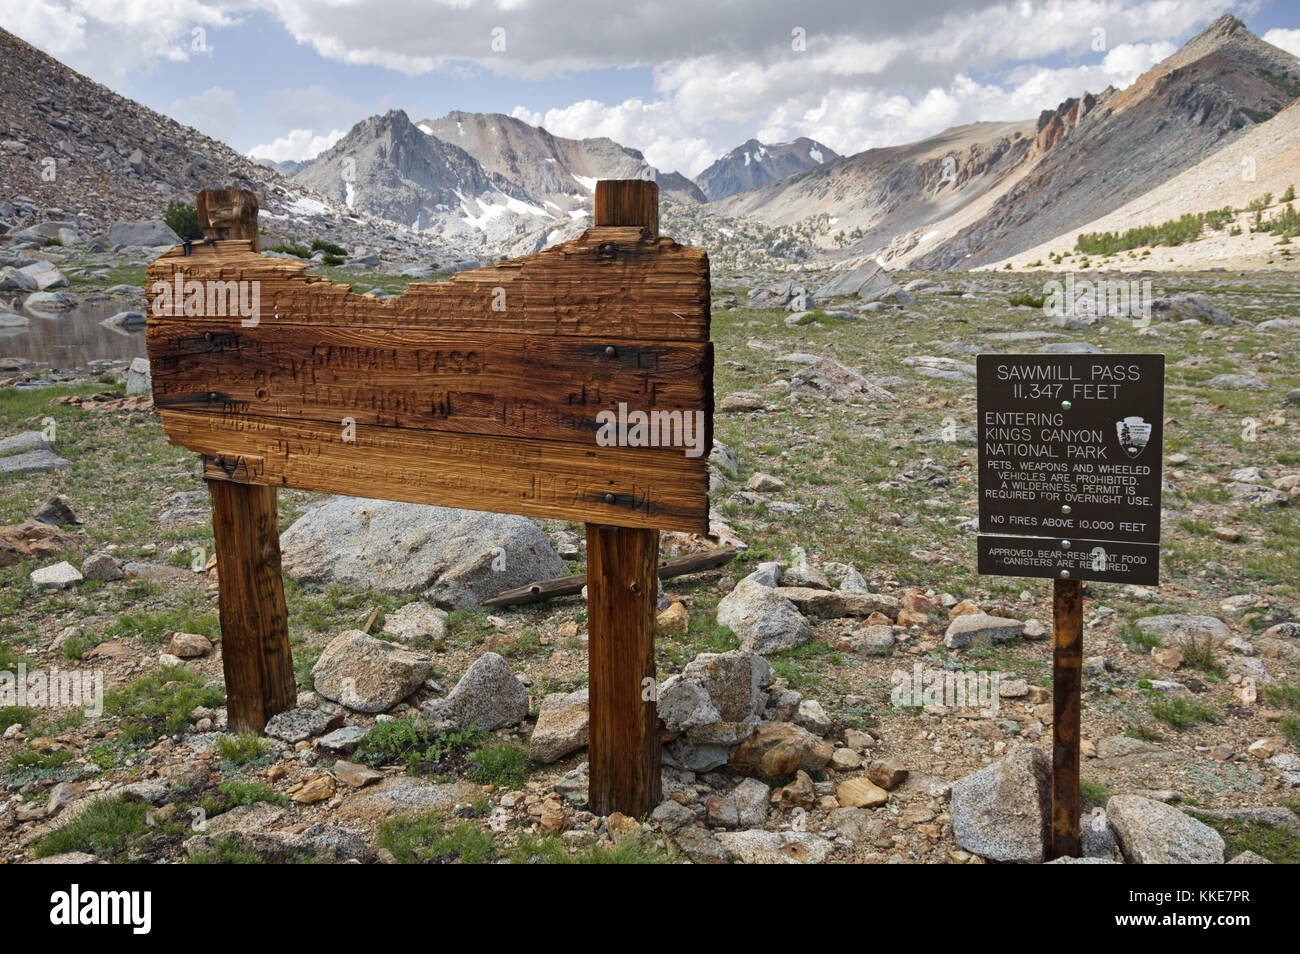 Sawmill Pass over the Sierra Nevada into Kings Canyon National Park Stock Photo